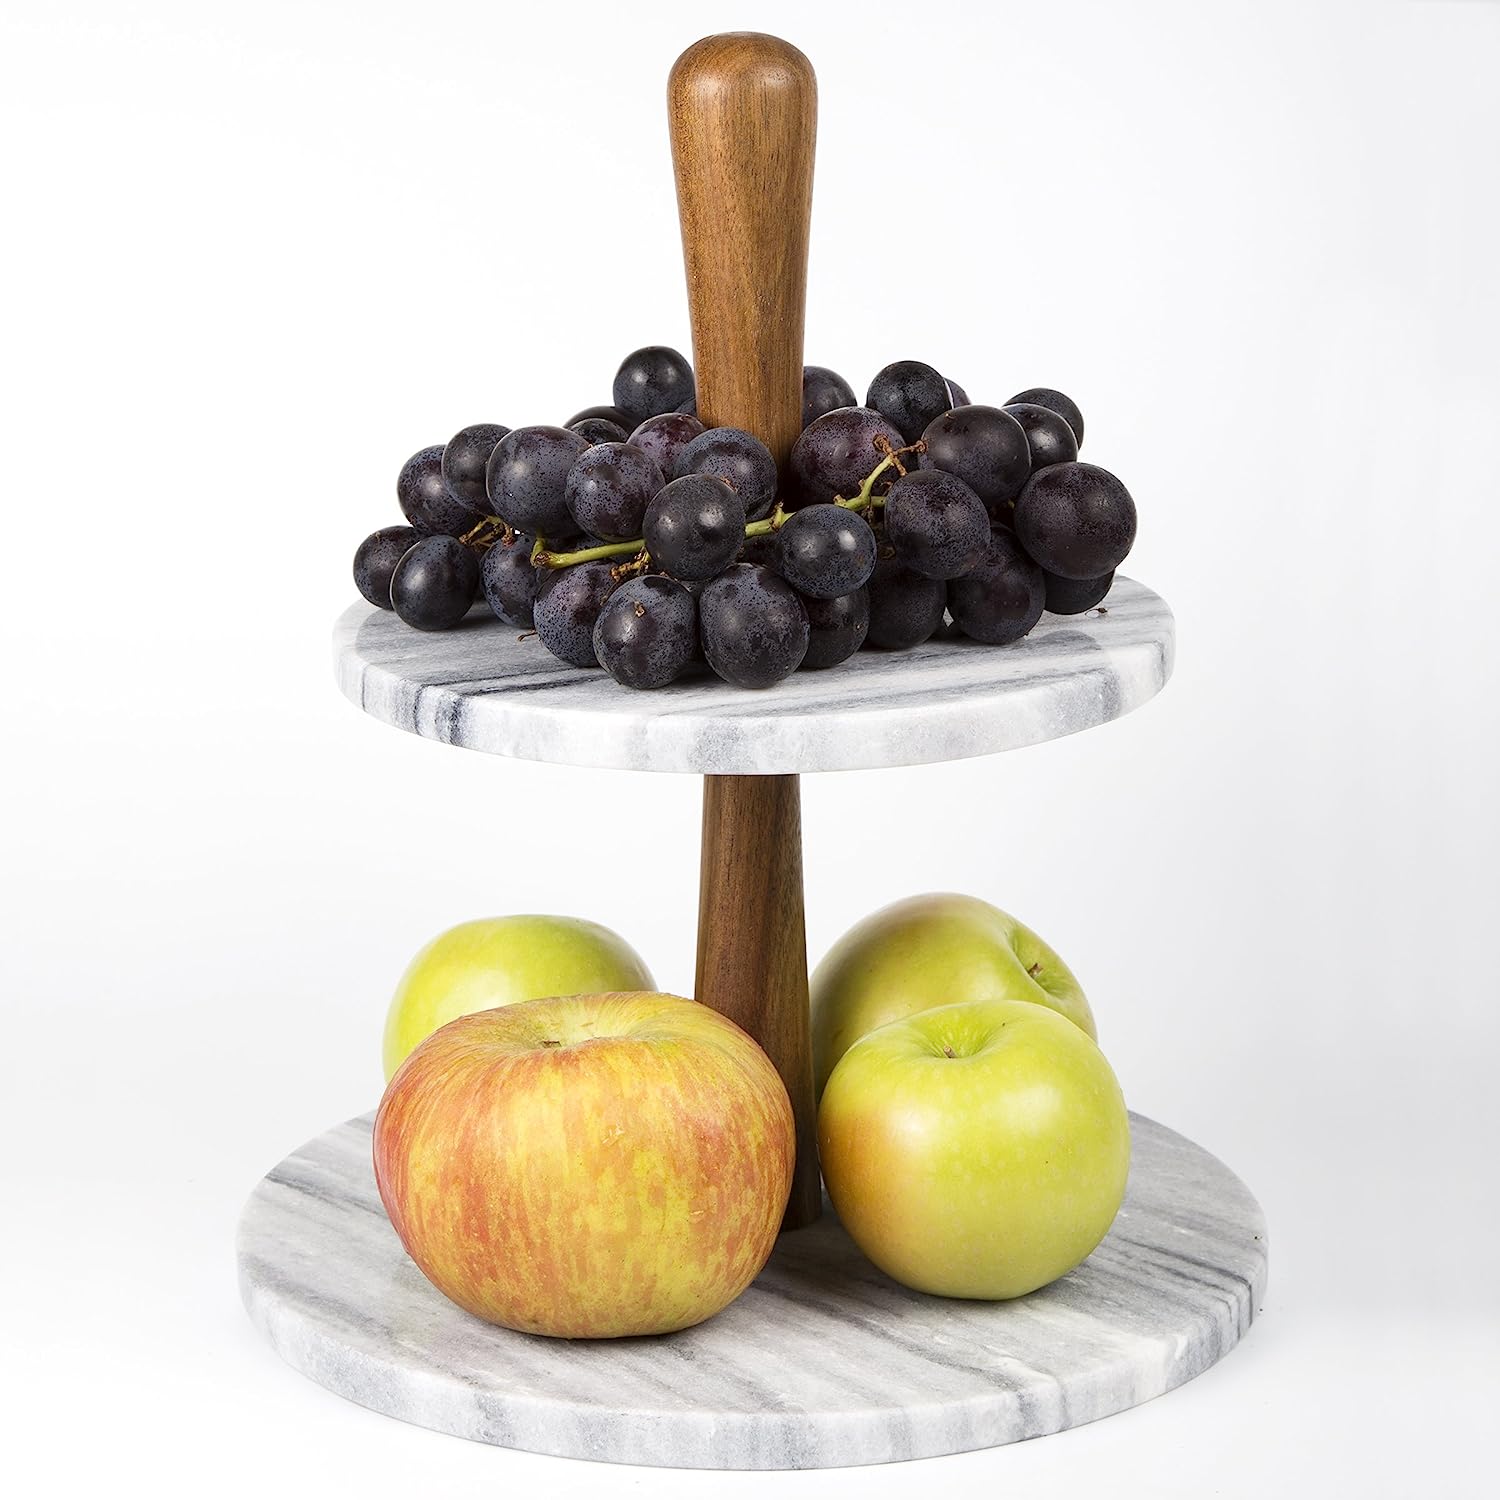 2-Tier Marble Cake Stand | Hand-Crafted | Natural Stone | Acacia Wood